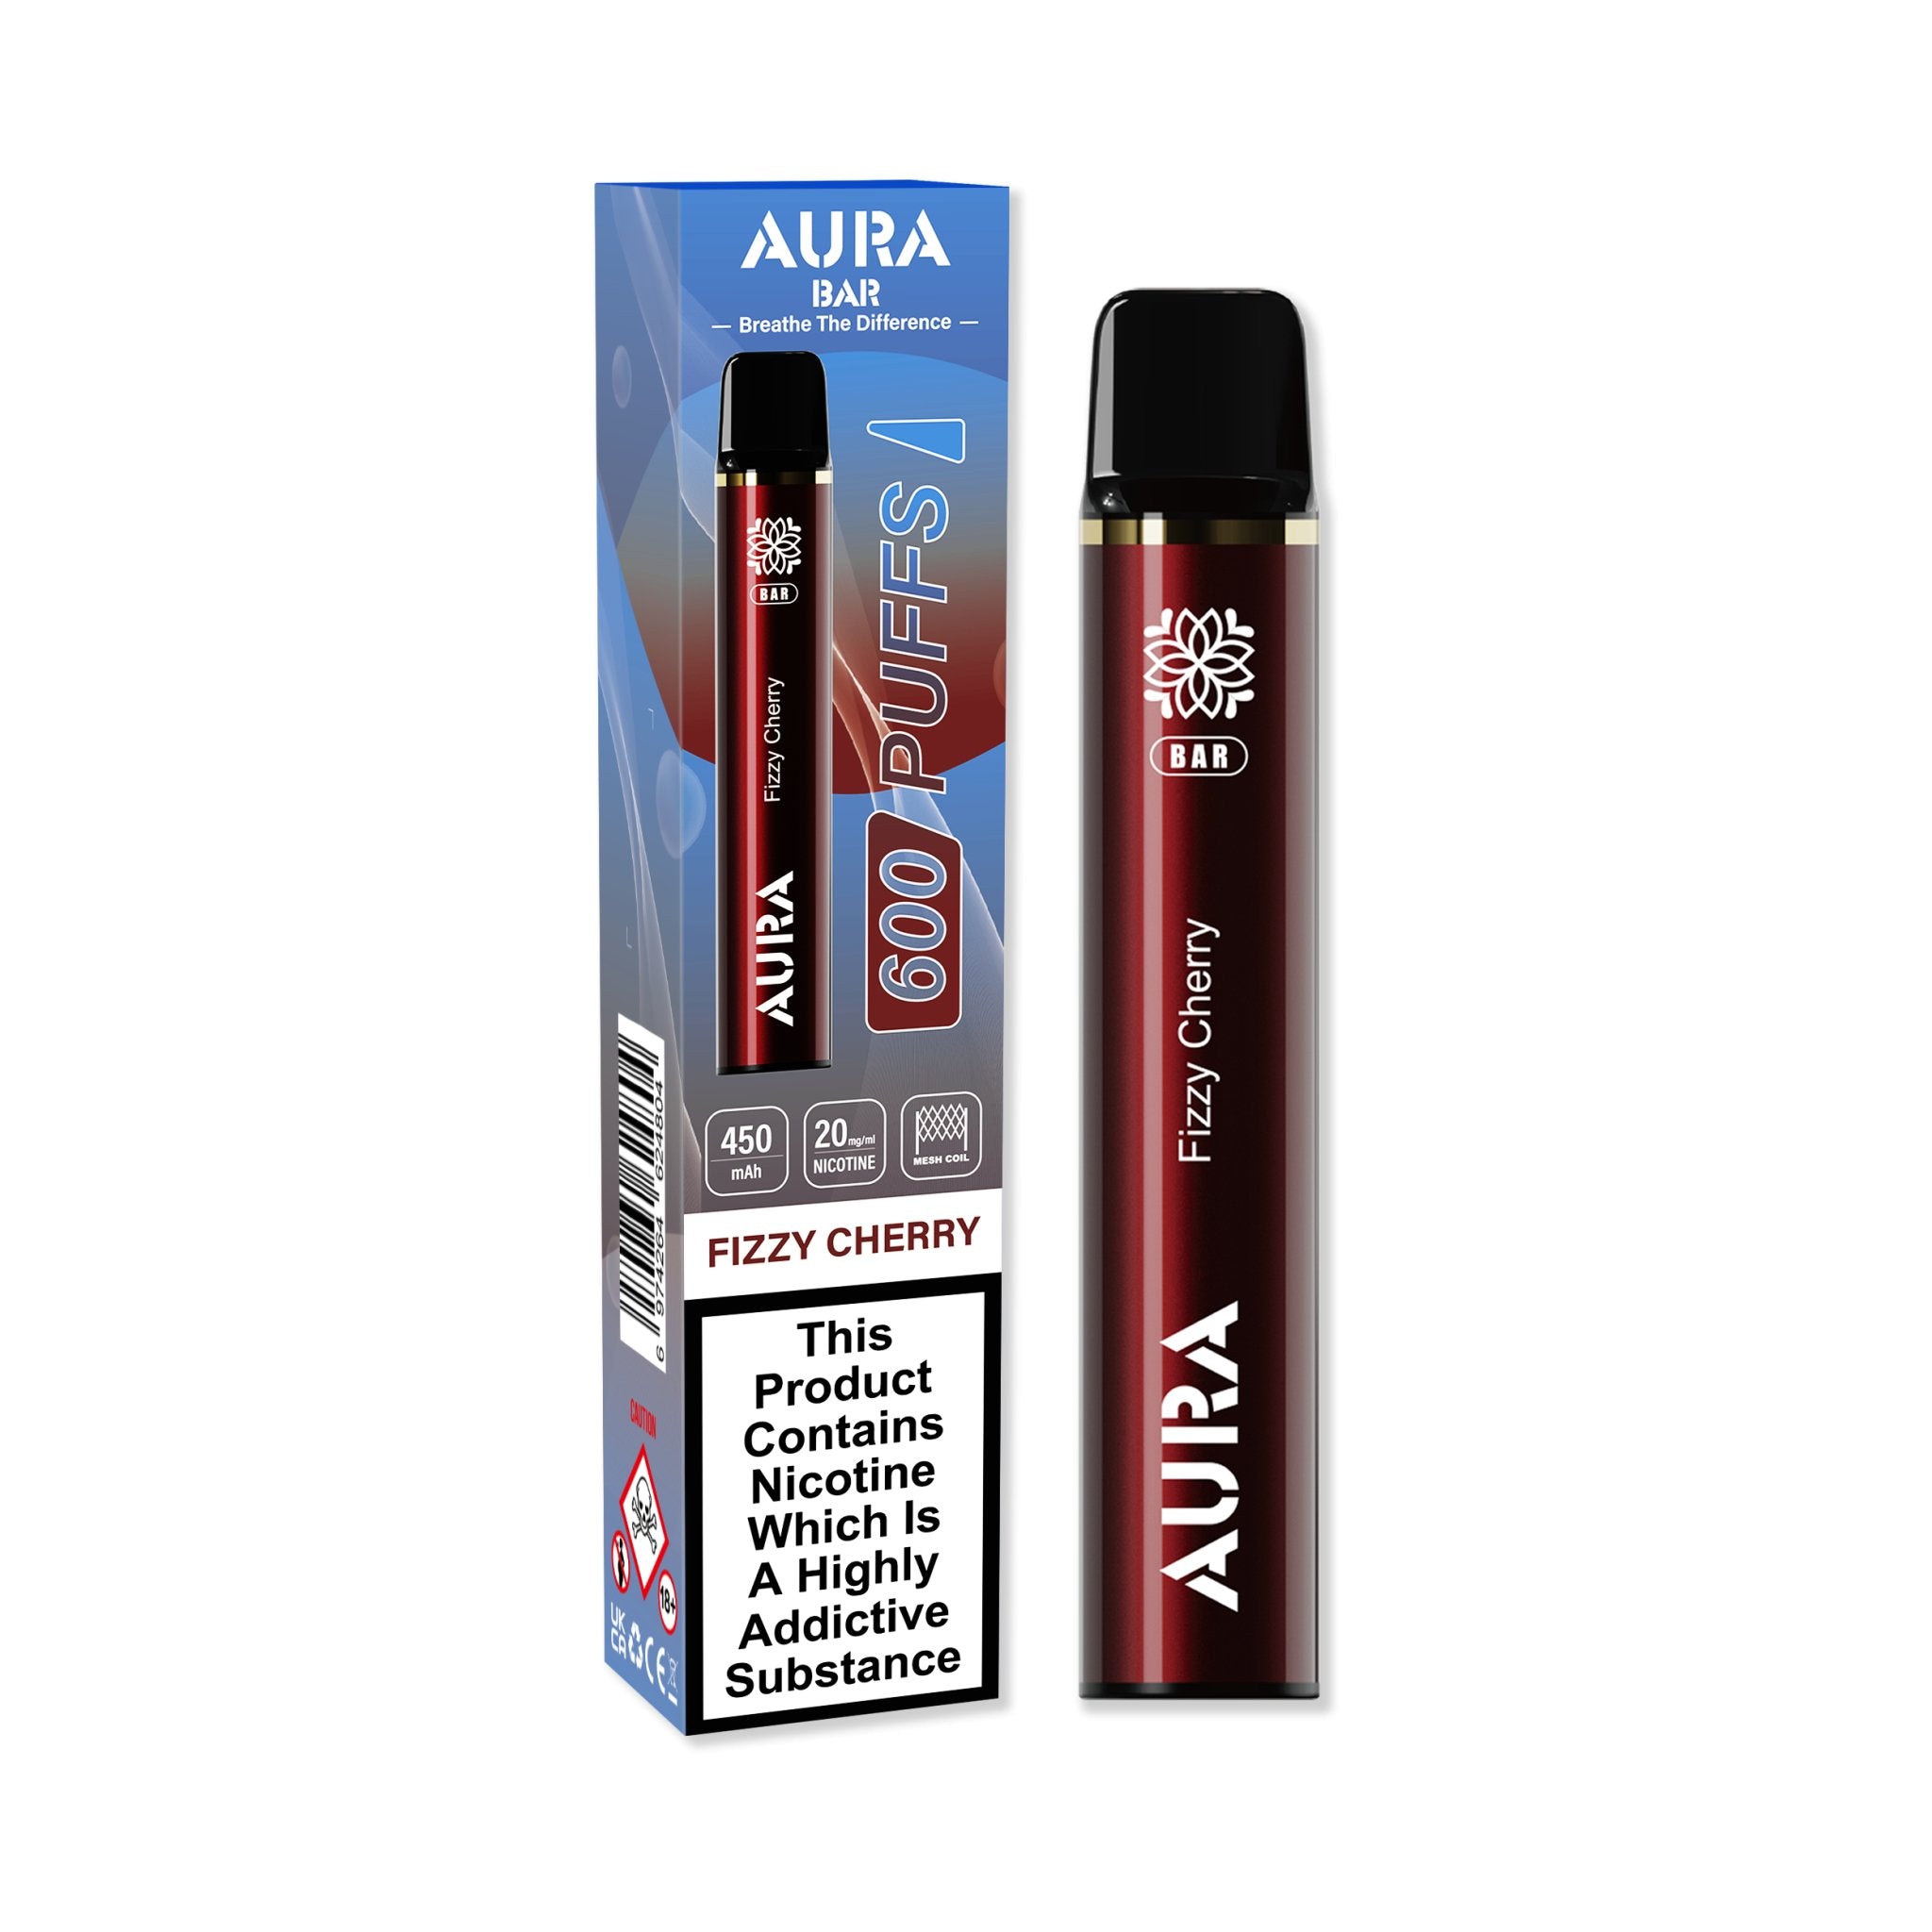 Aura Bar 600 Puffs Disposable Vape By Crystal Prime - Wolfvapes.co.uk-Fizzy Cherry